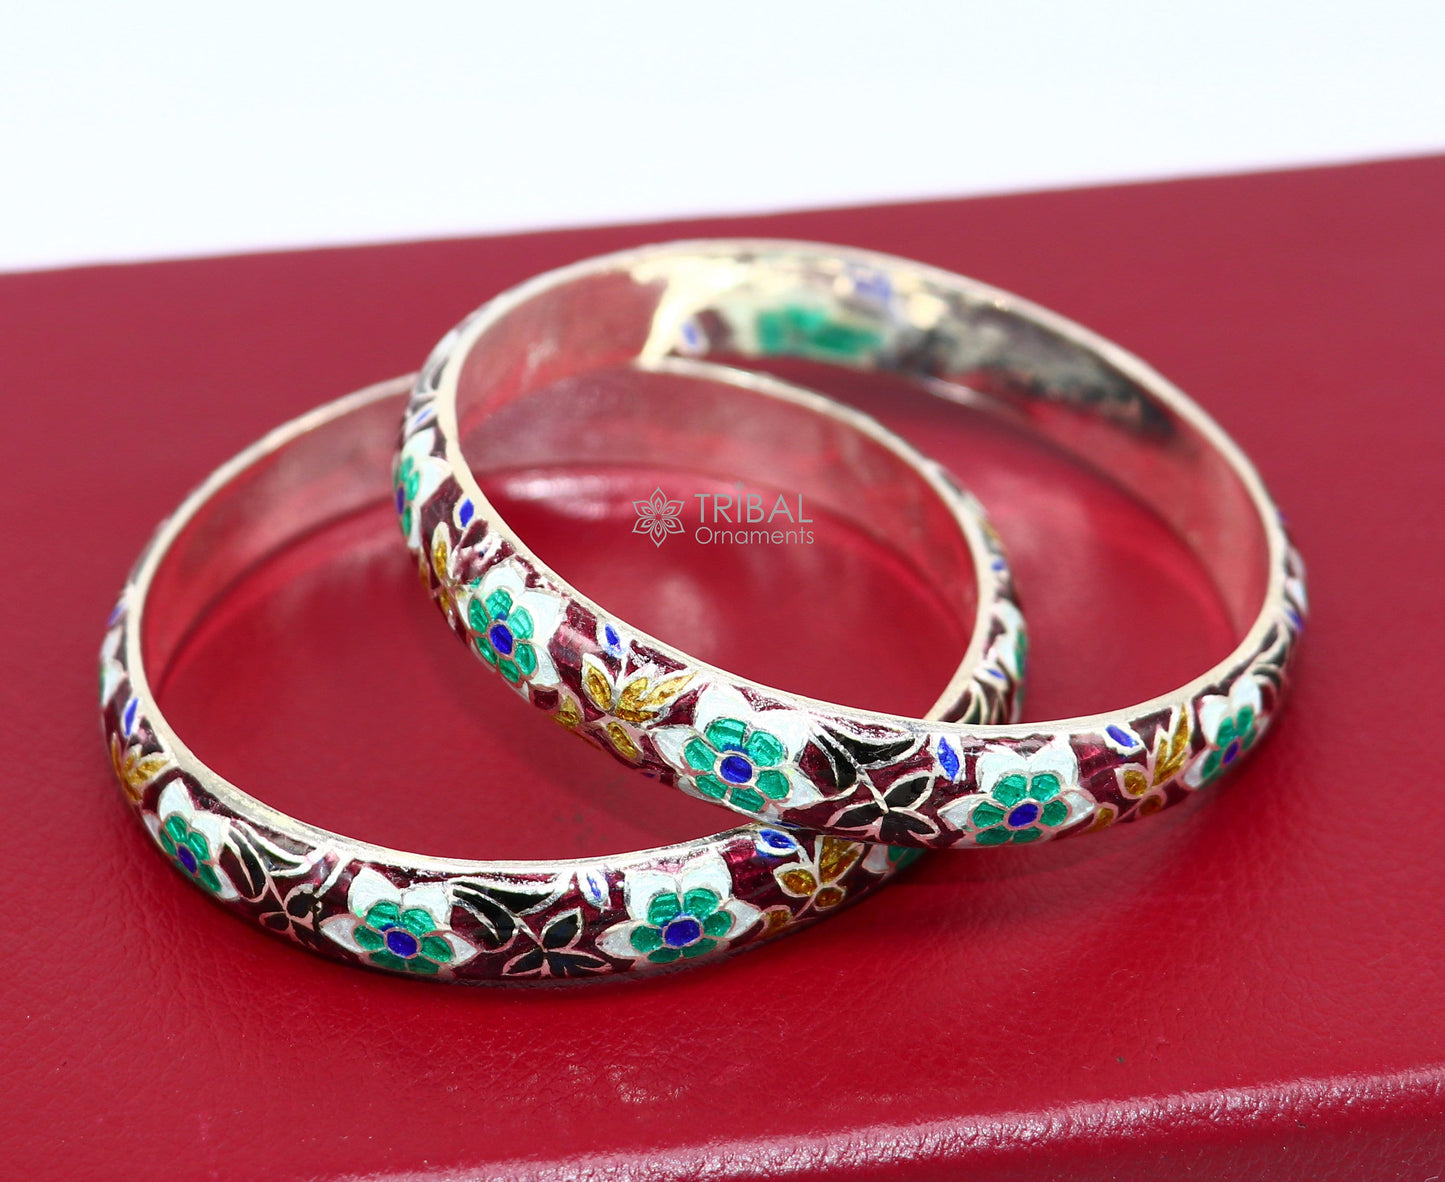 925 Sterling silver handmade amazing meenakari (color enamel )bangle bracelet vintage Cultral trendy style jewelry from india nba354 - TRIBAL ORNAMENTS